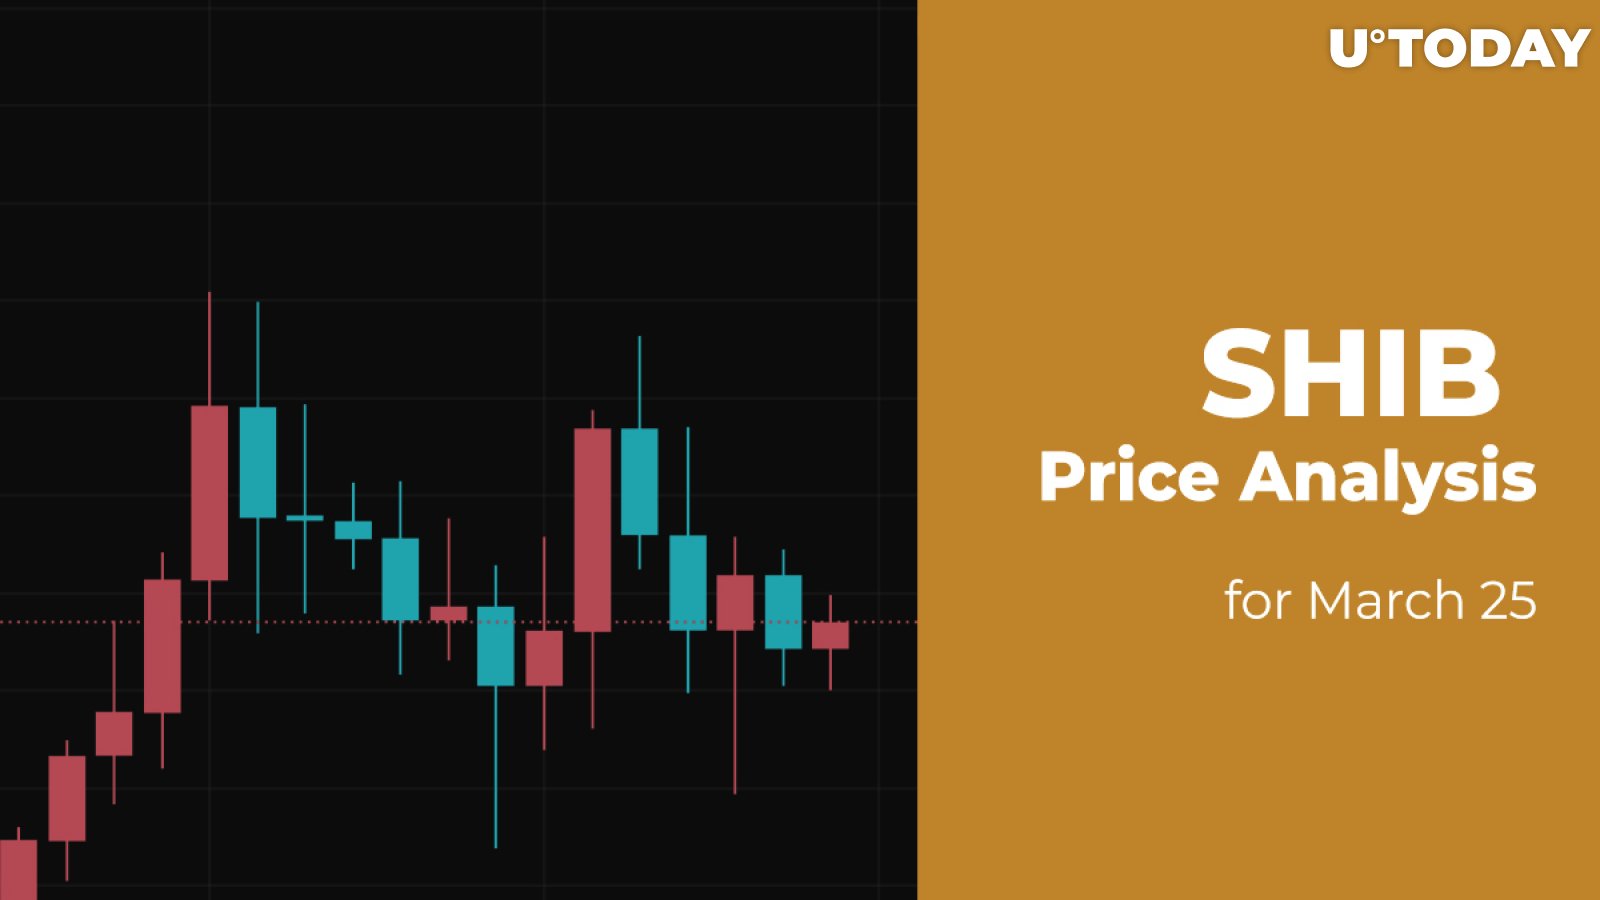 SHIB Price Analysis for March 25